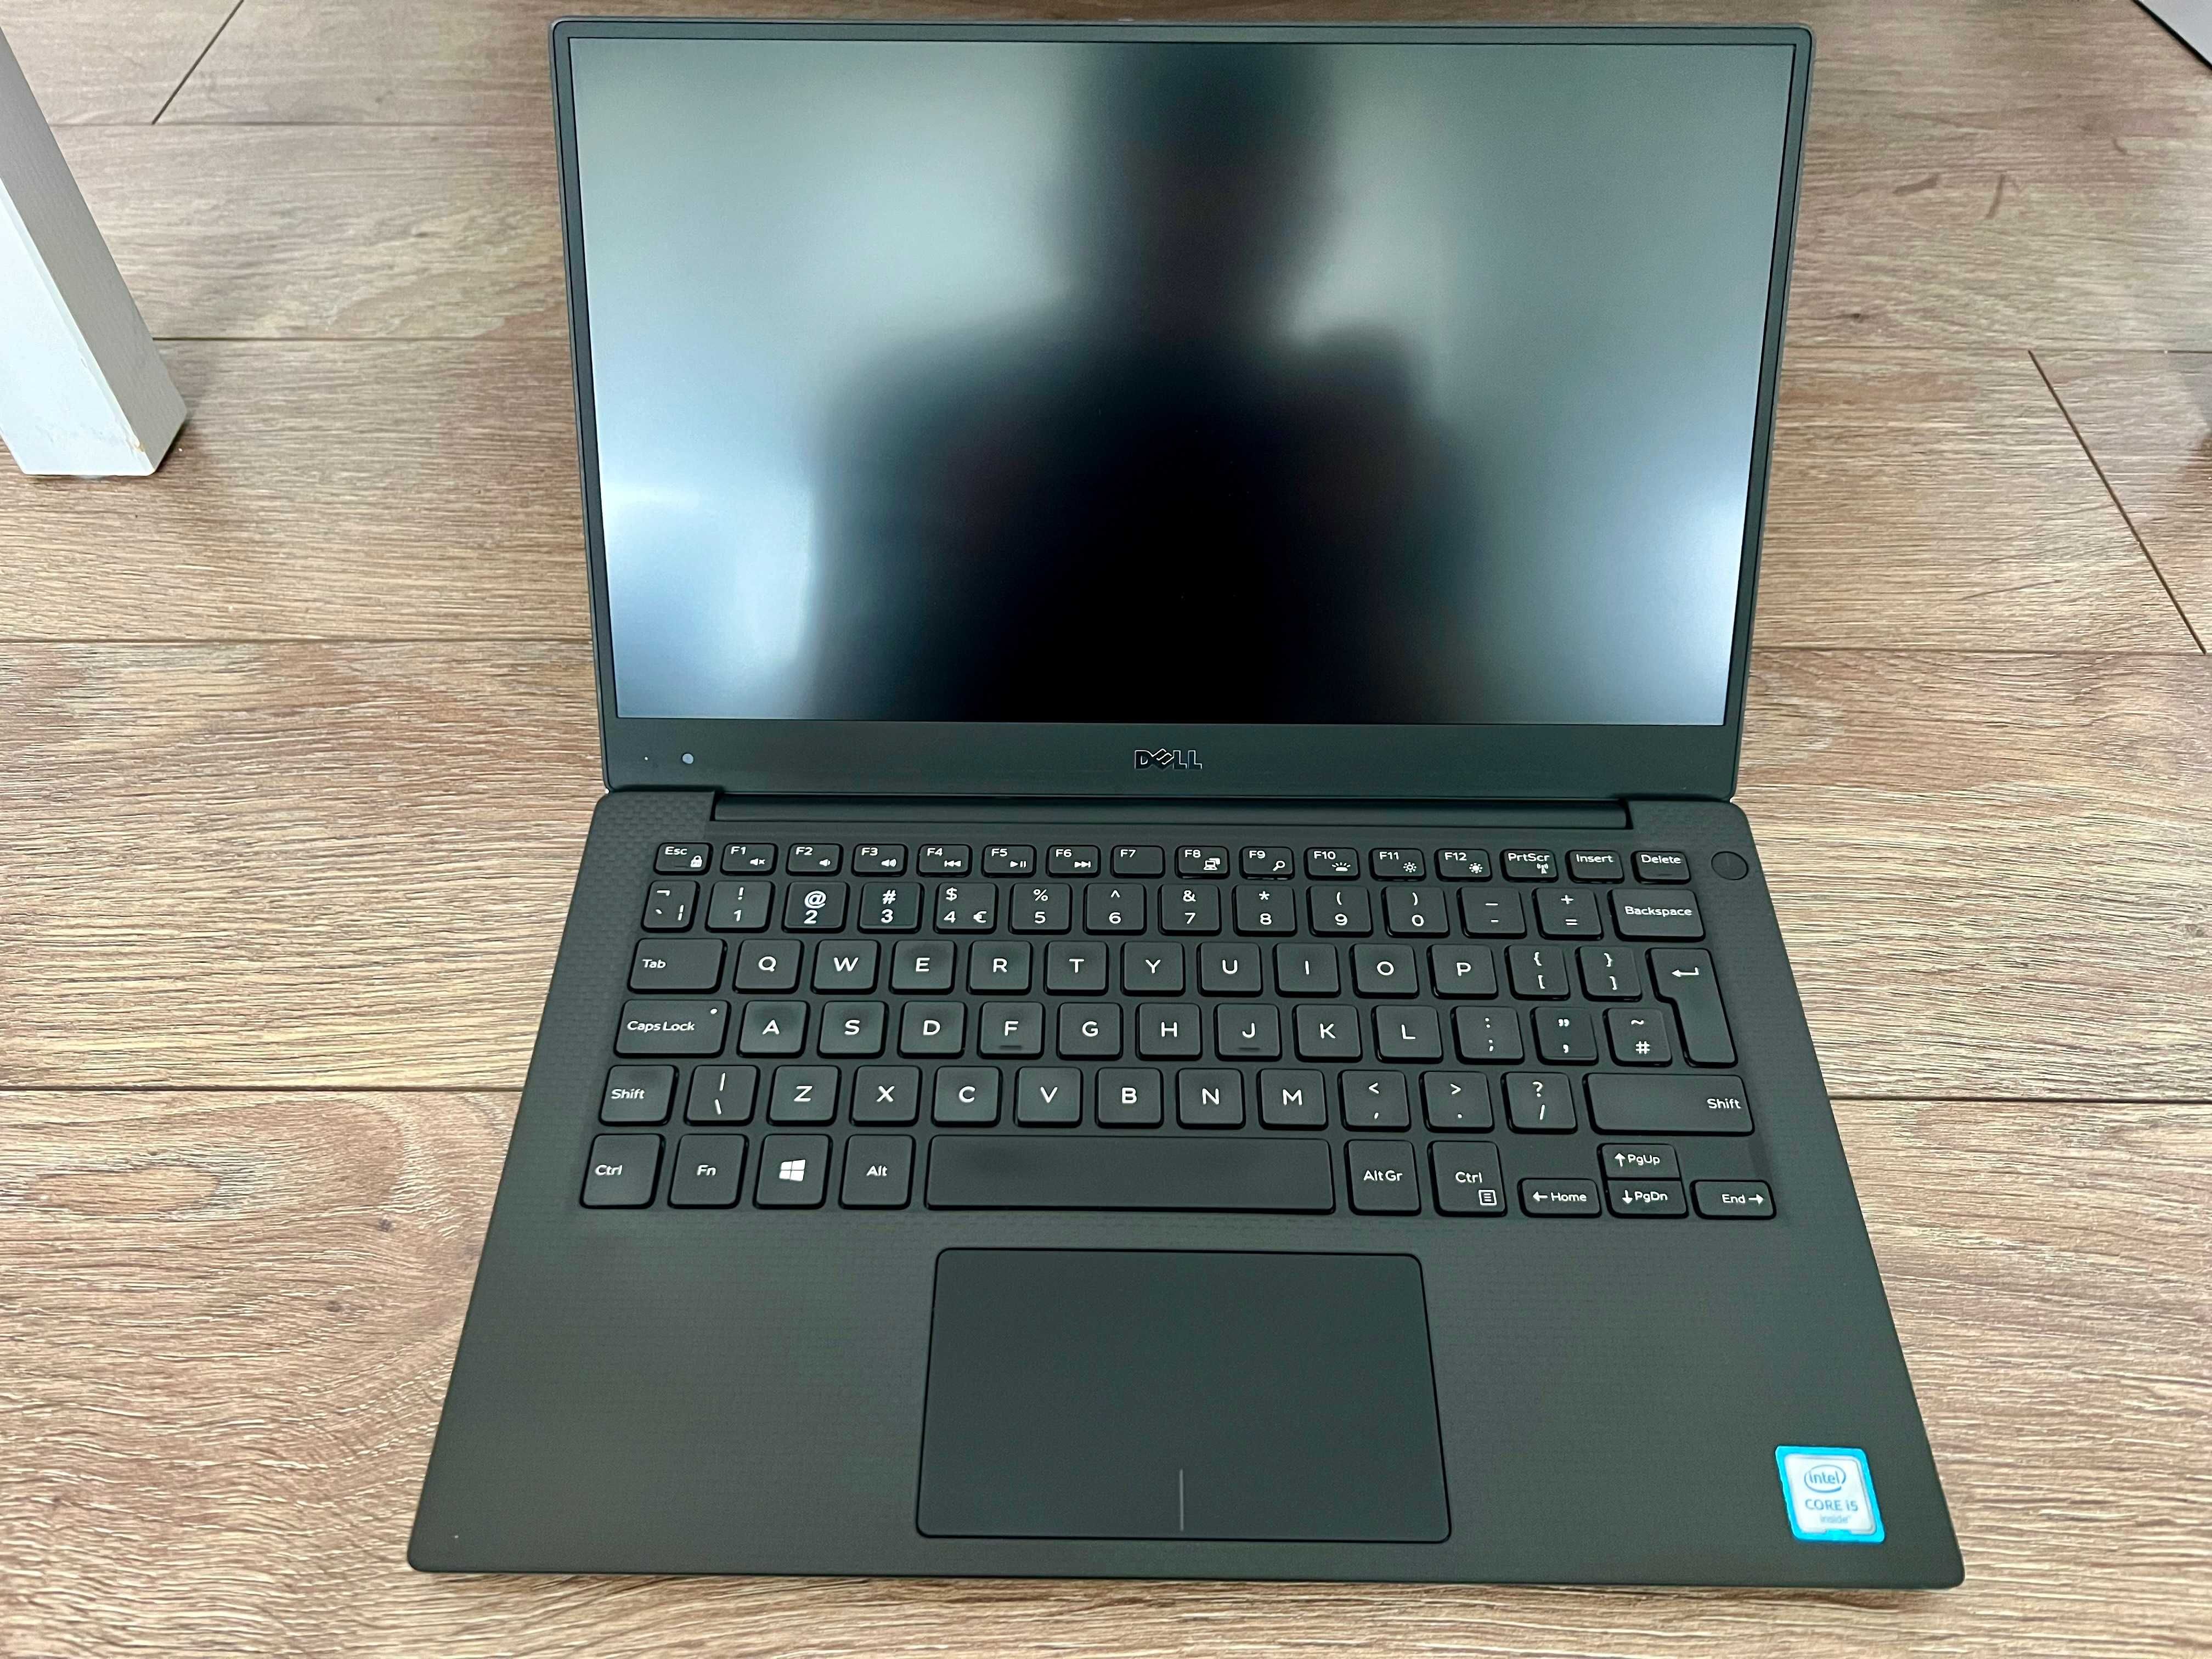 Dell XPS 13 9350.